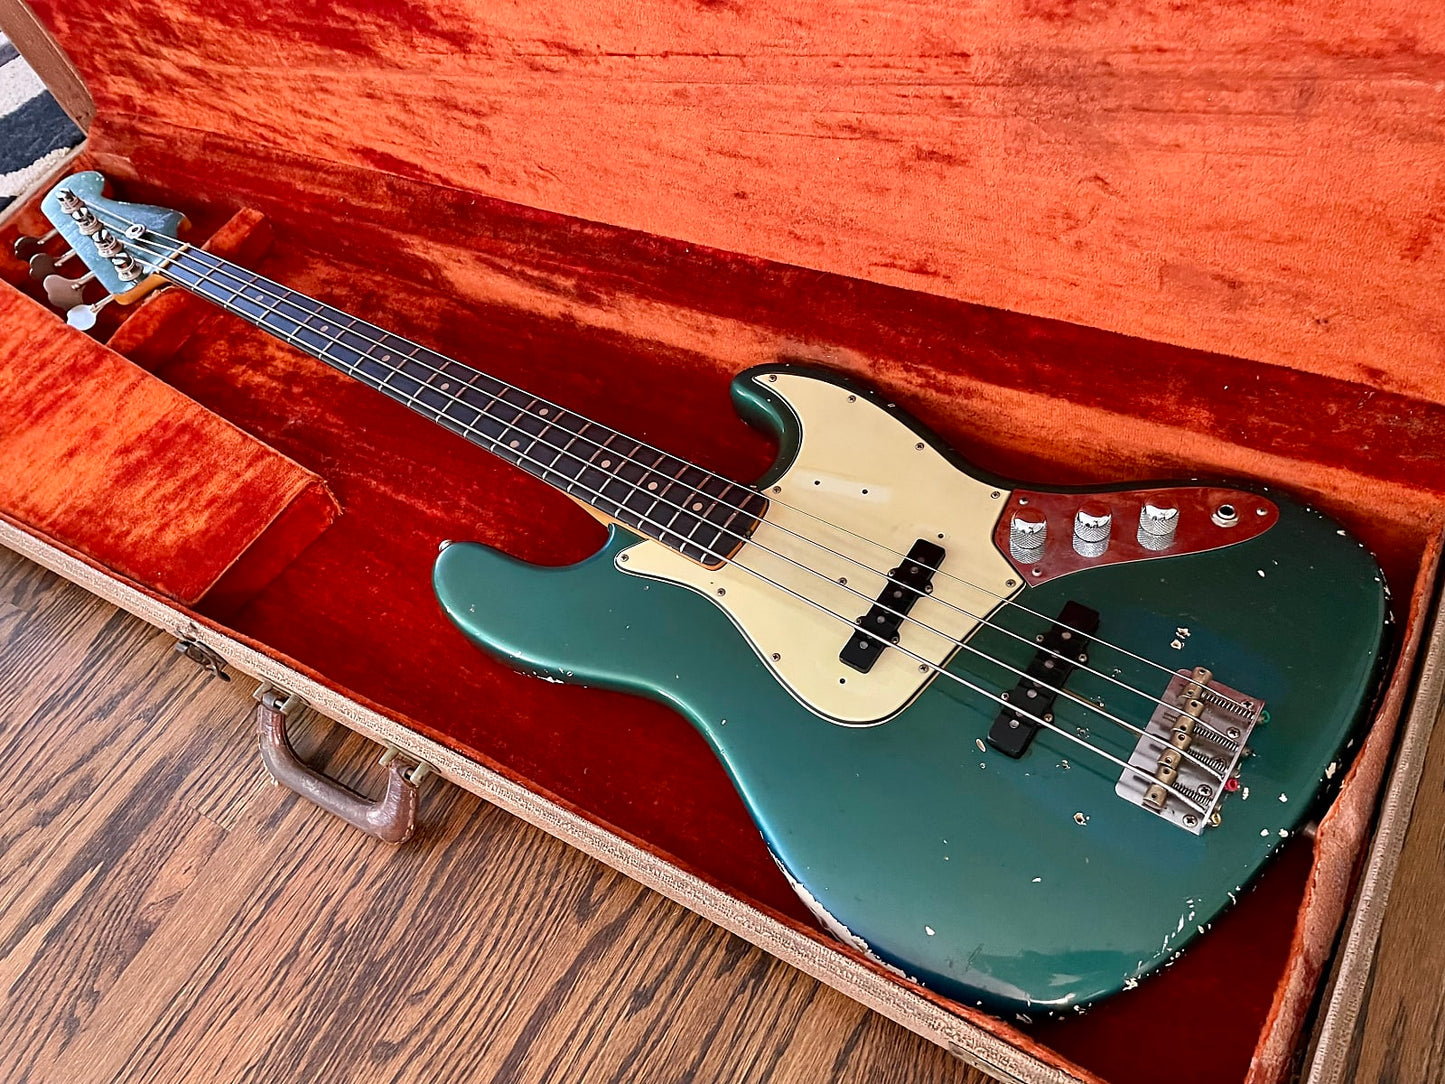 Fender Jazz Bass 1962 Lake Placid Blue - Very Good Condition